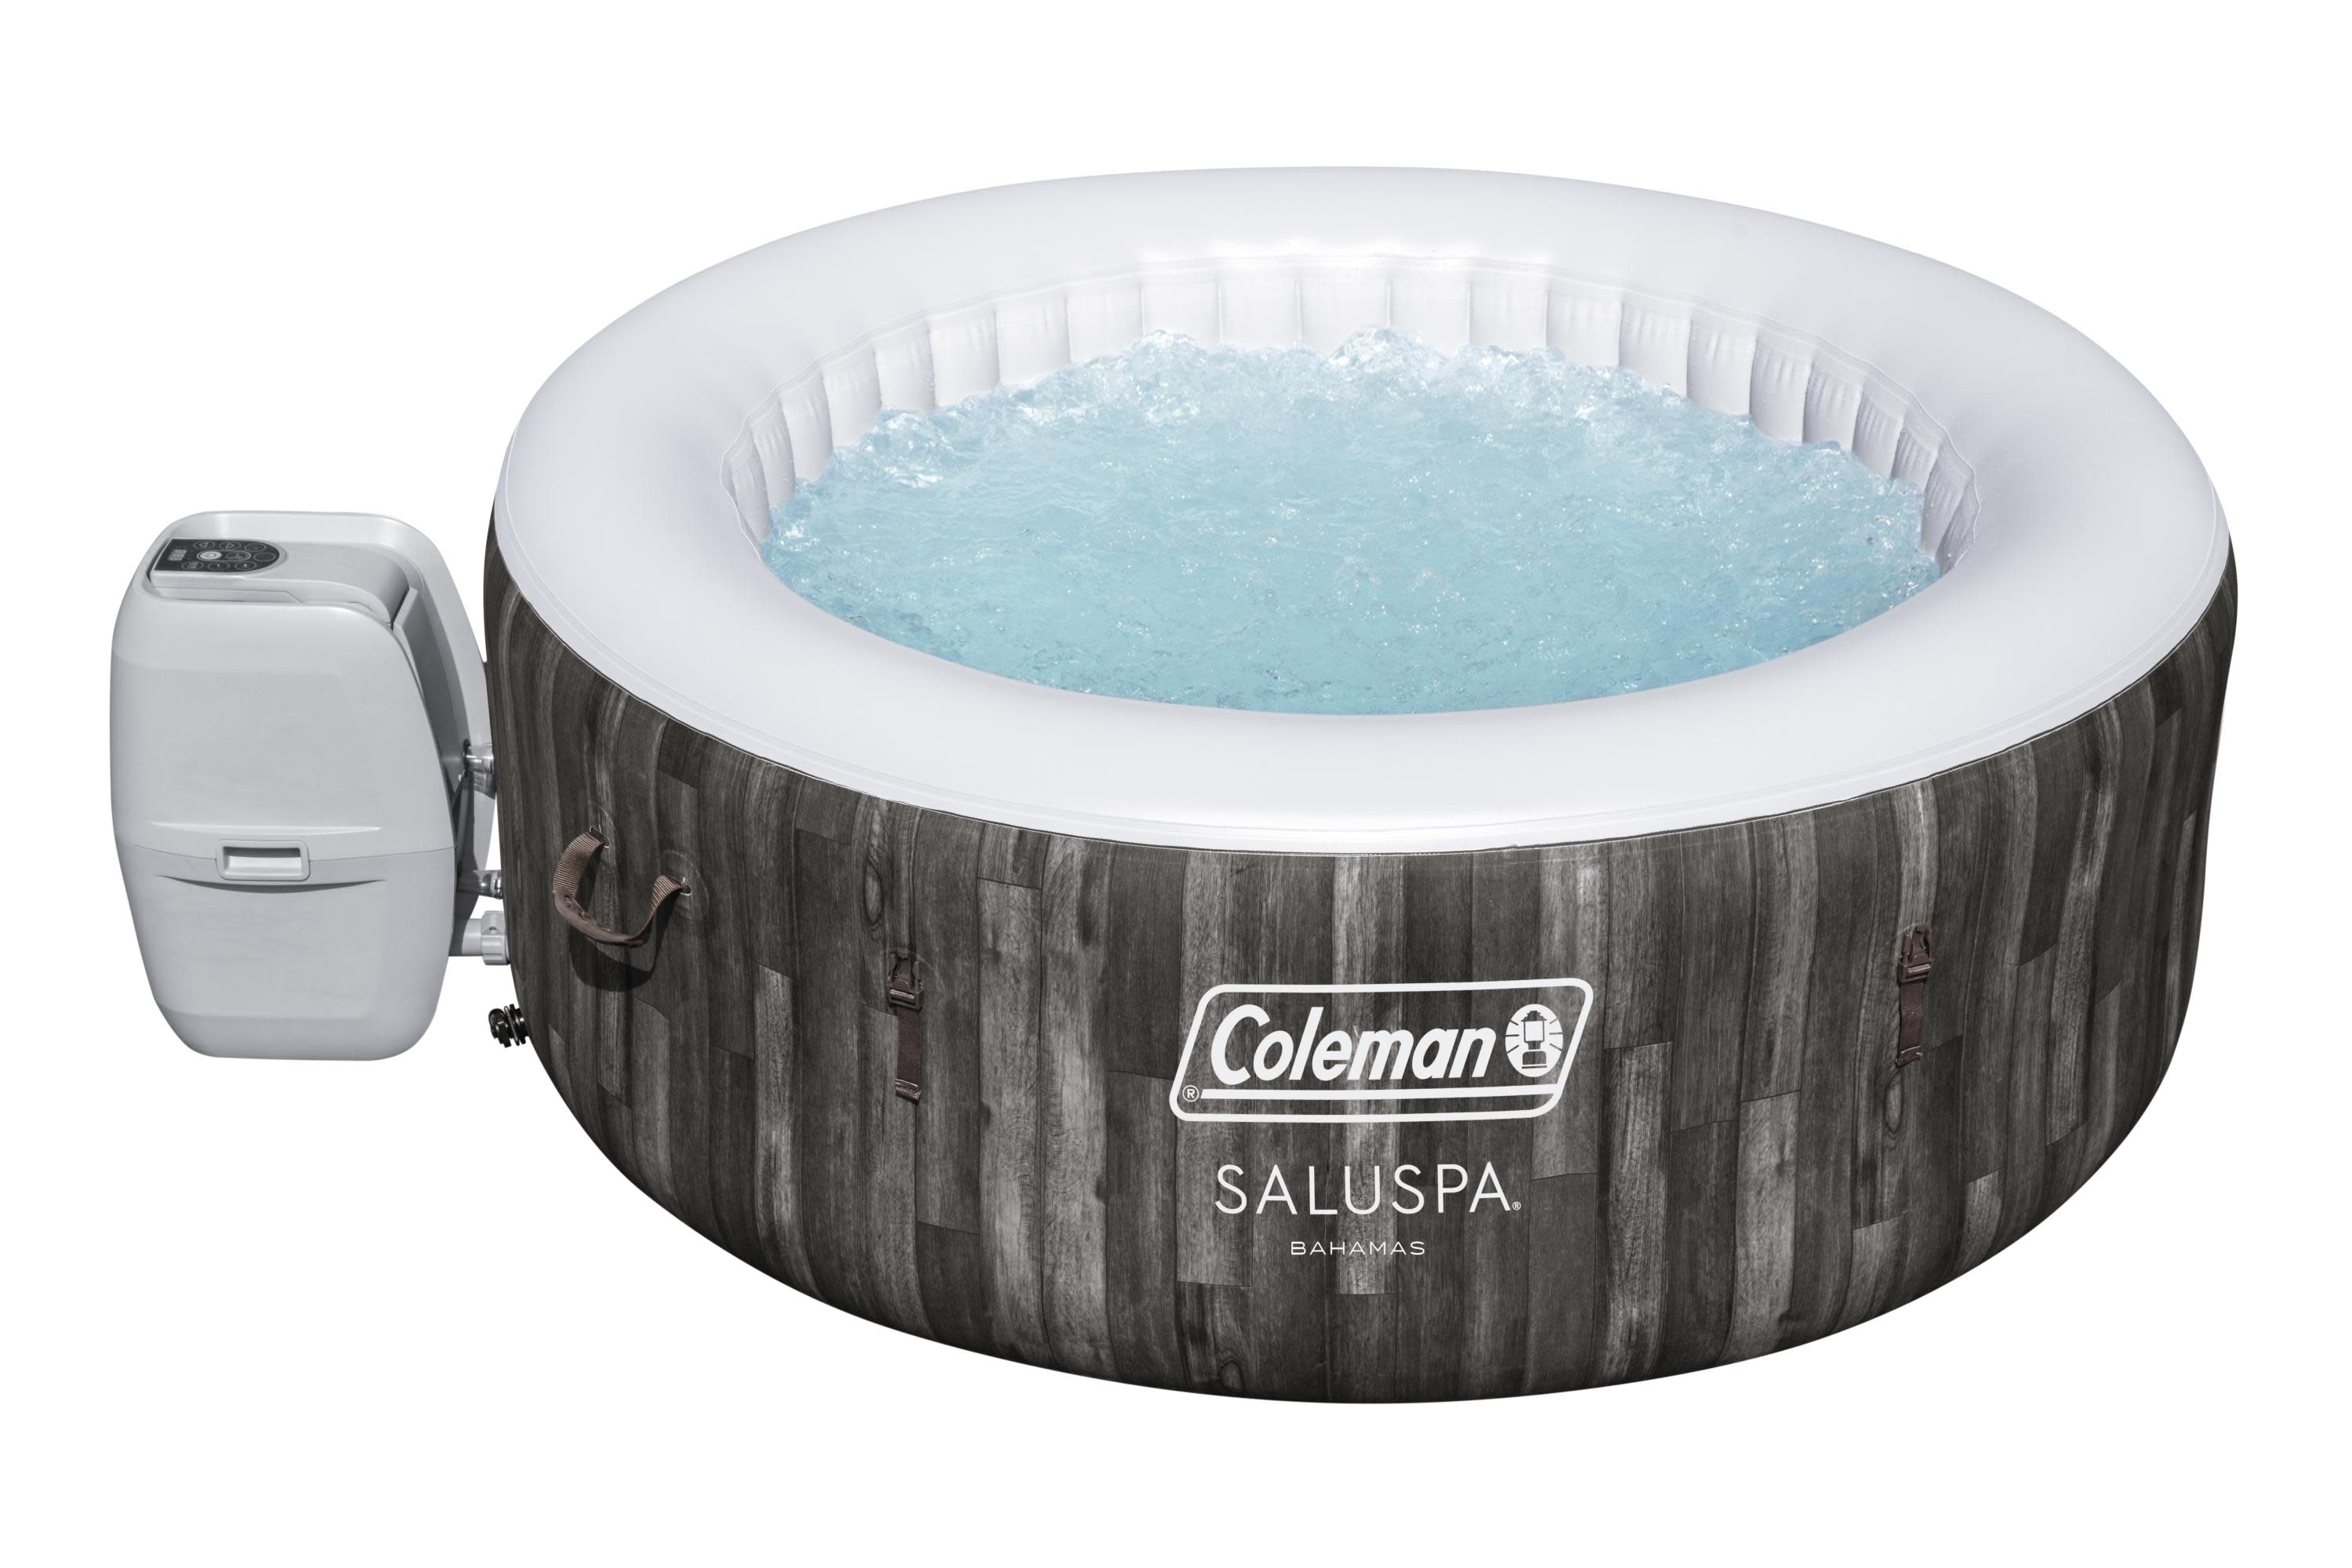 Coleman 71" x 26" Bahamas AirJet Spa Outdoor 177 gal. Spring Inflatable Hot Tub, 104˚F - image 1 of 10